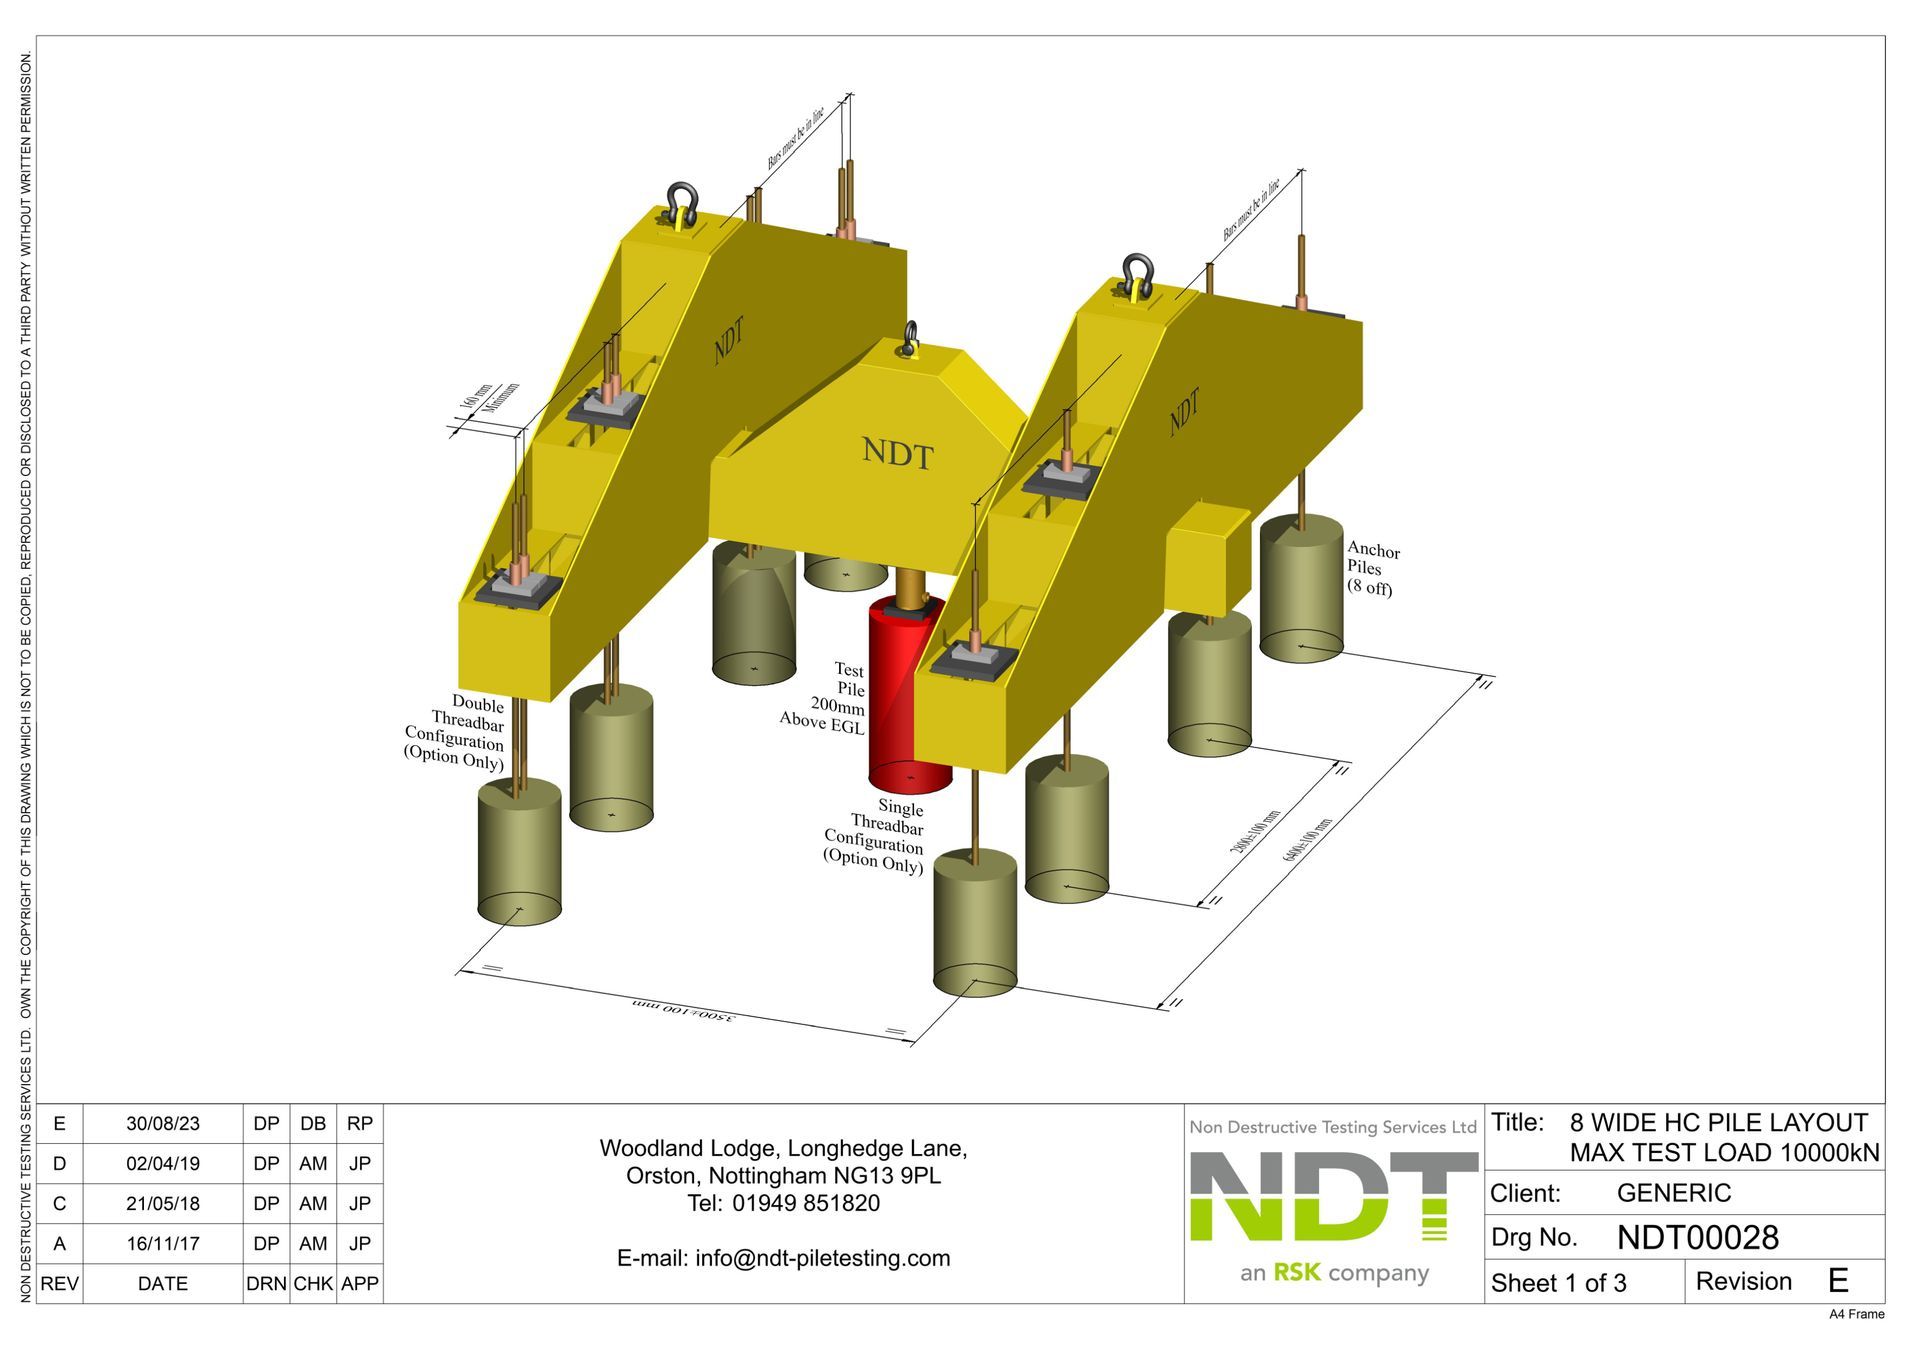 NDT00027 4 Large Capacity Pile Layout ​(8000kN)